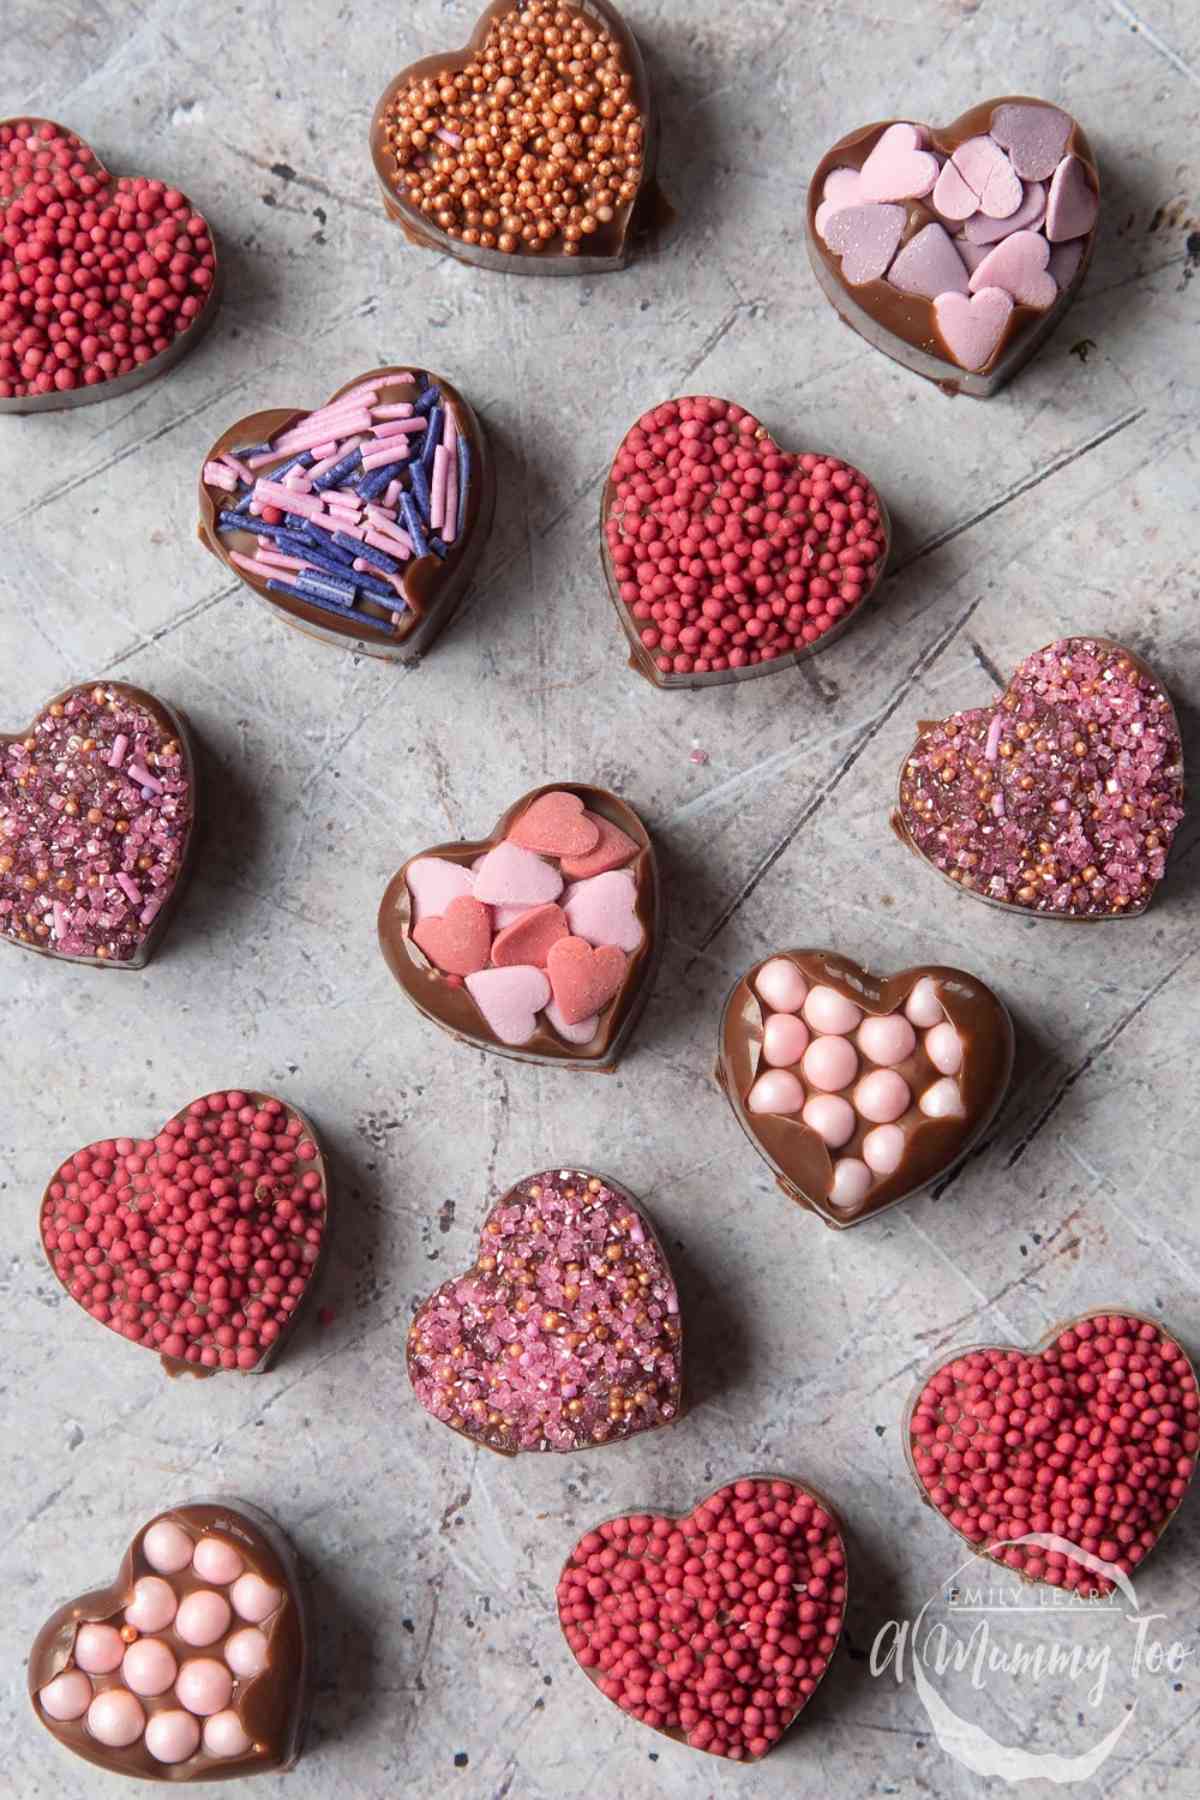 Heart shaped chocolate candies covered in sprinkles.